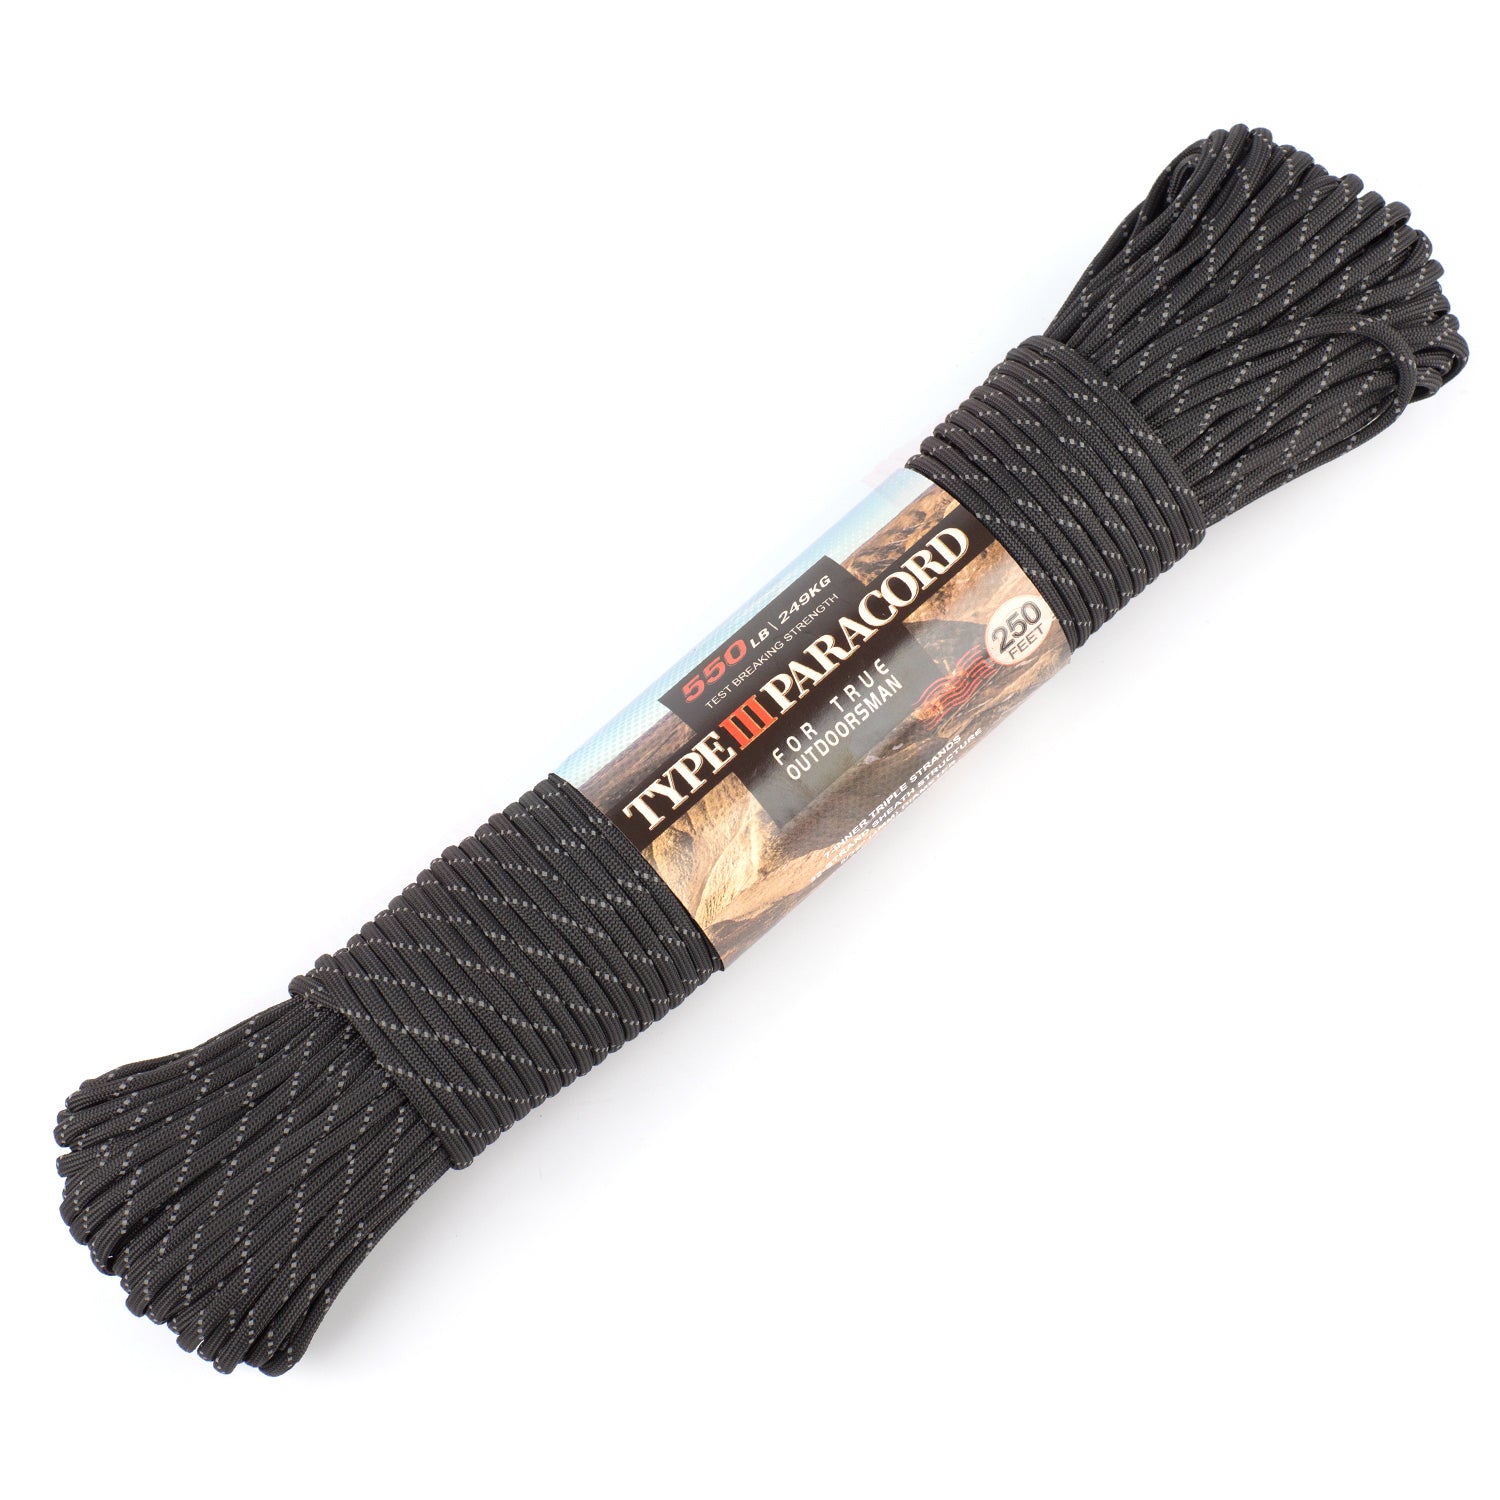 HERCULES Type III Paracord 550 Paracord Rope Parachute Cord 50- 1000'  Reflective